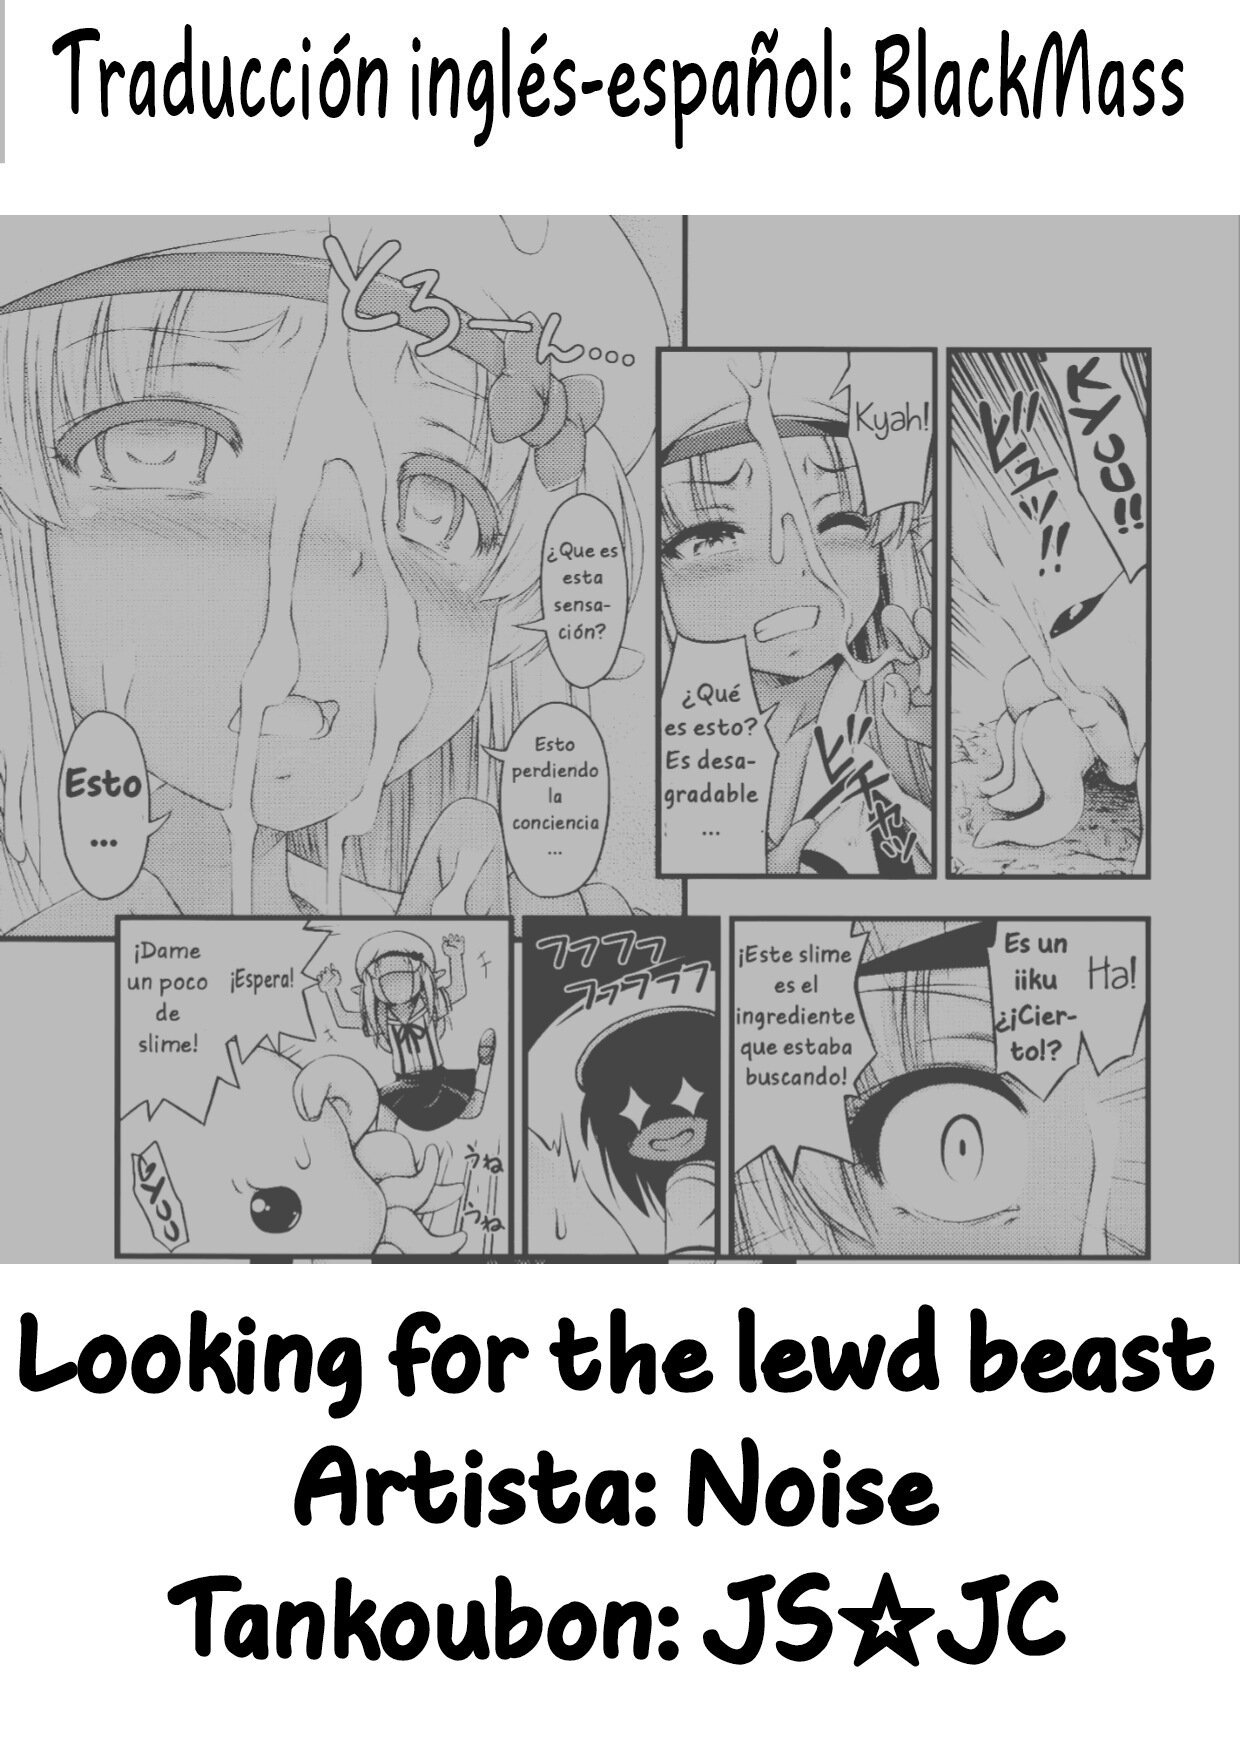 &#91;Noise&#93; Looking for the lewd beast - 20